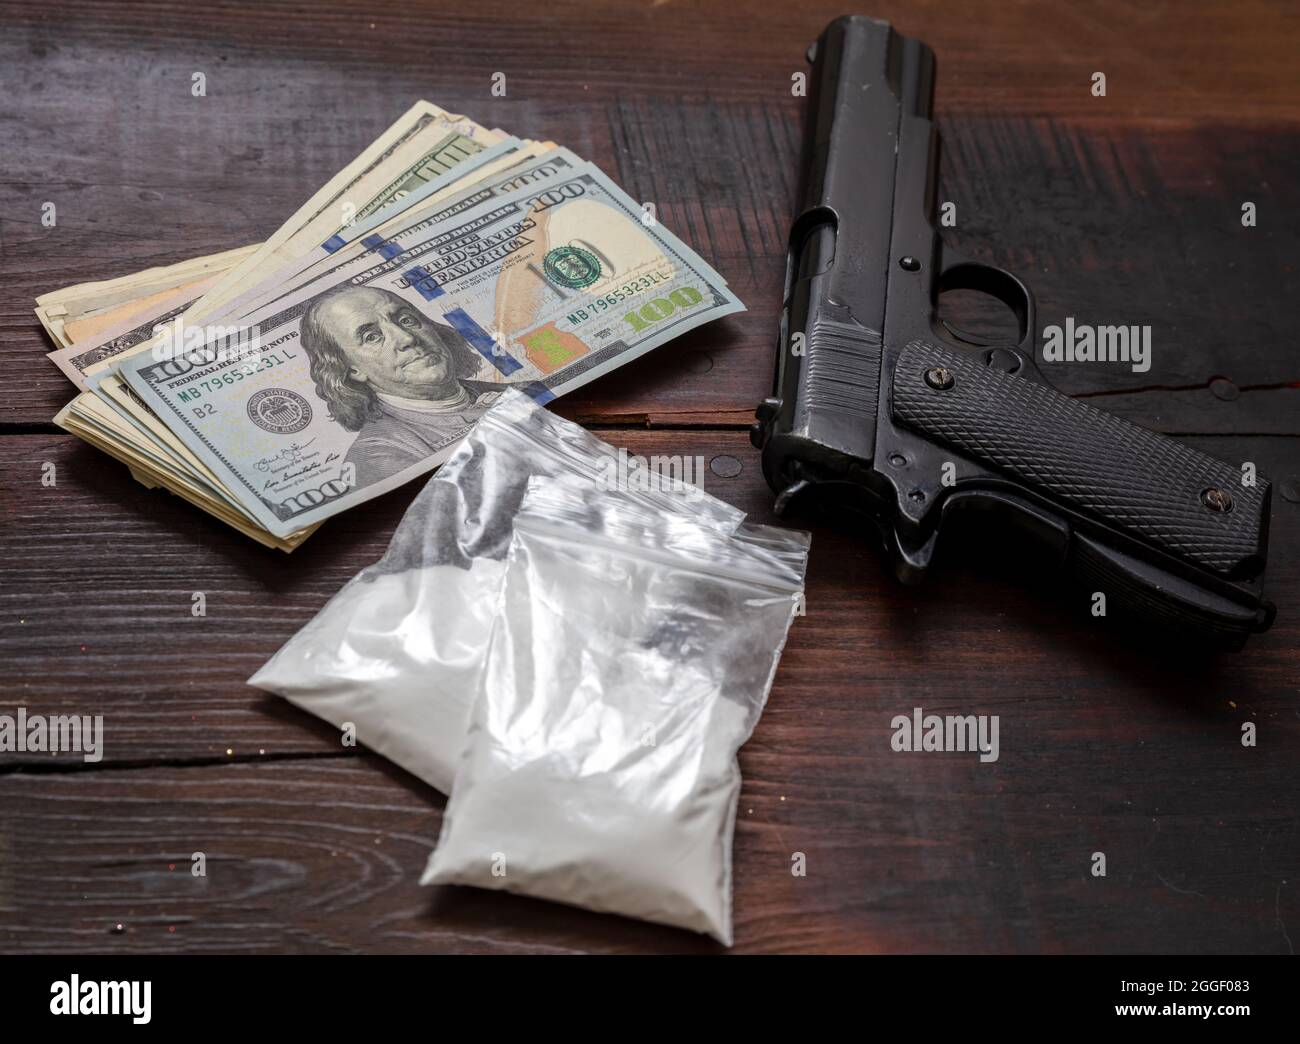 Drugs narcotics illegal business concept. Cocaine plastic packets, pistol and US dollars banknotes on a table. White powder addiction and crime Stock Photo